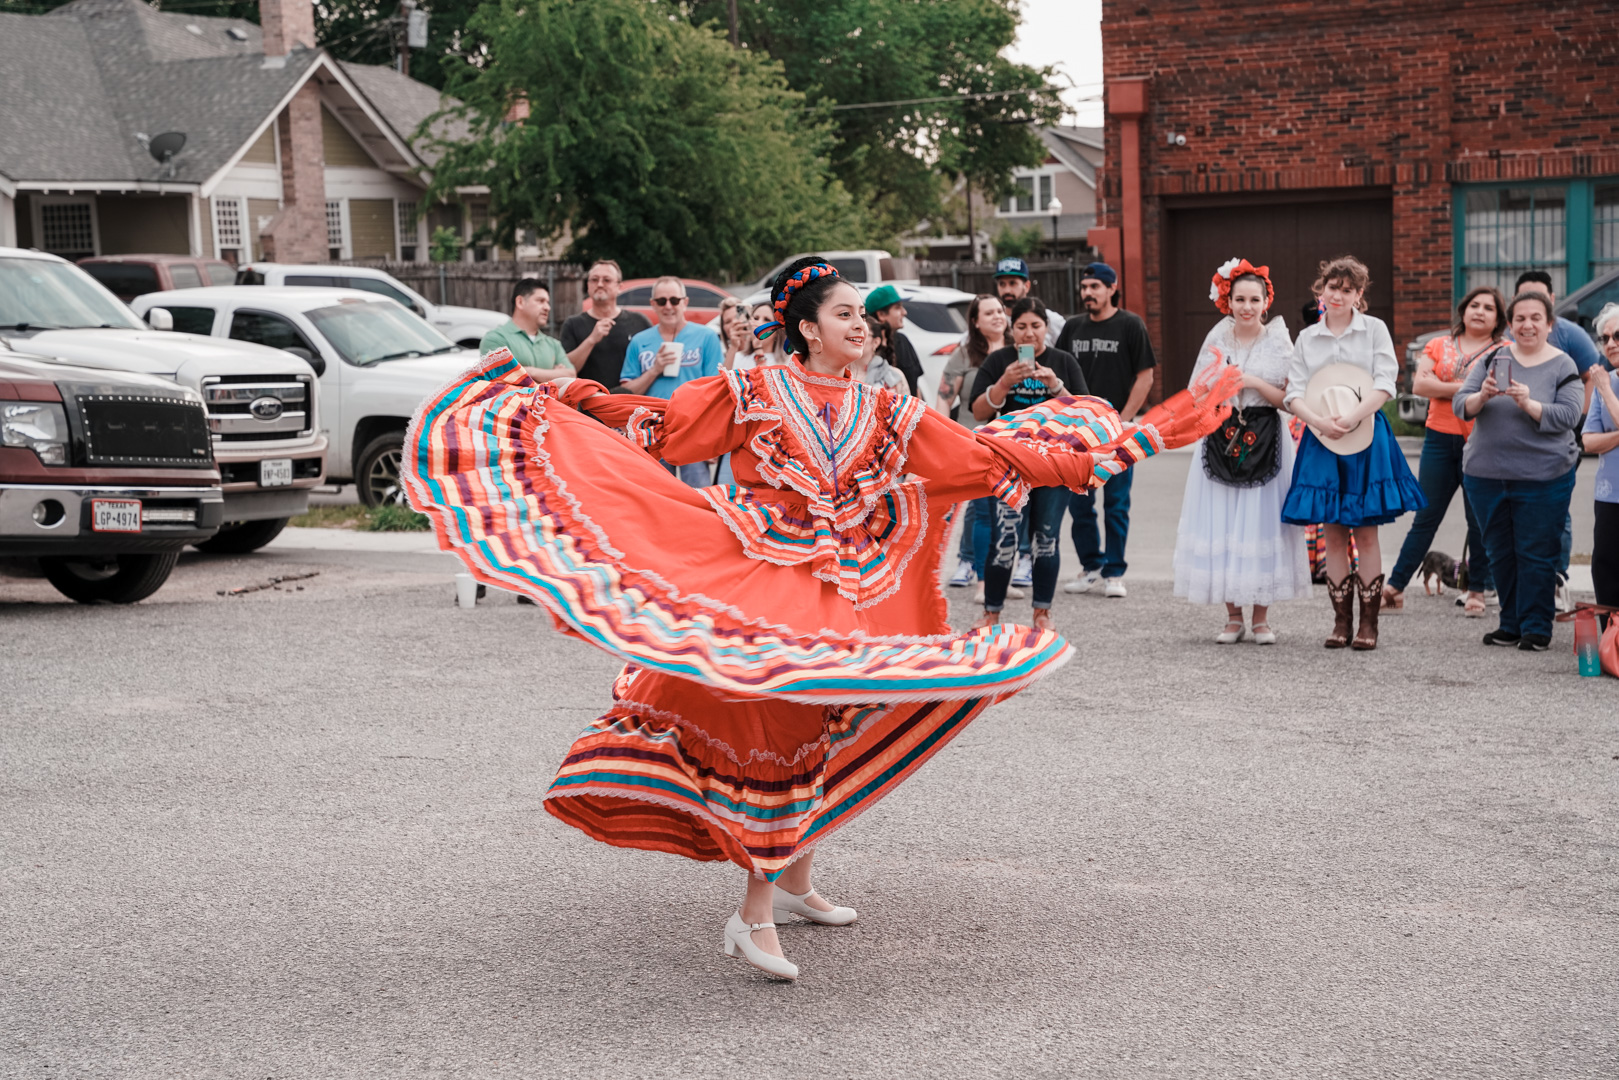 A young woman dances in a traditional Mexican dance dress